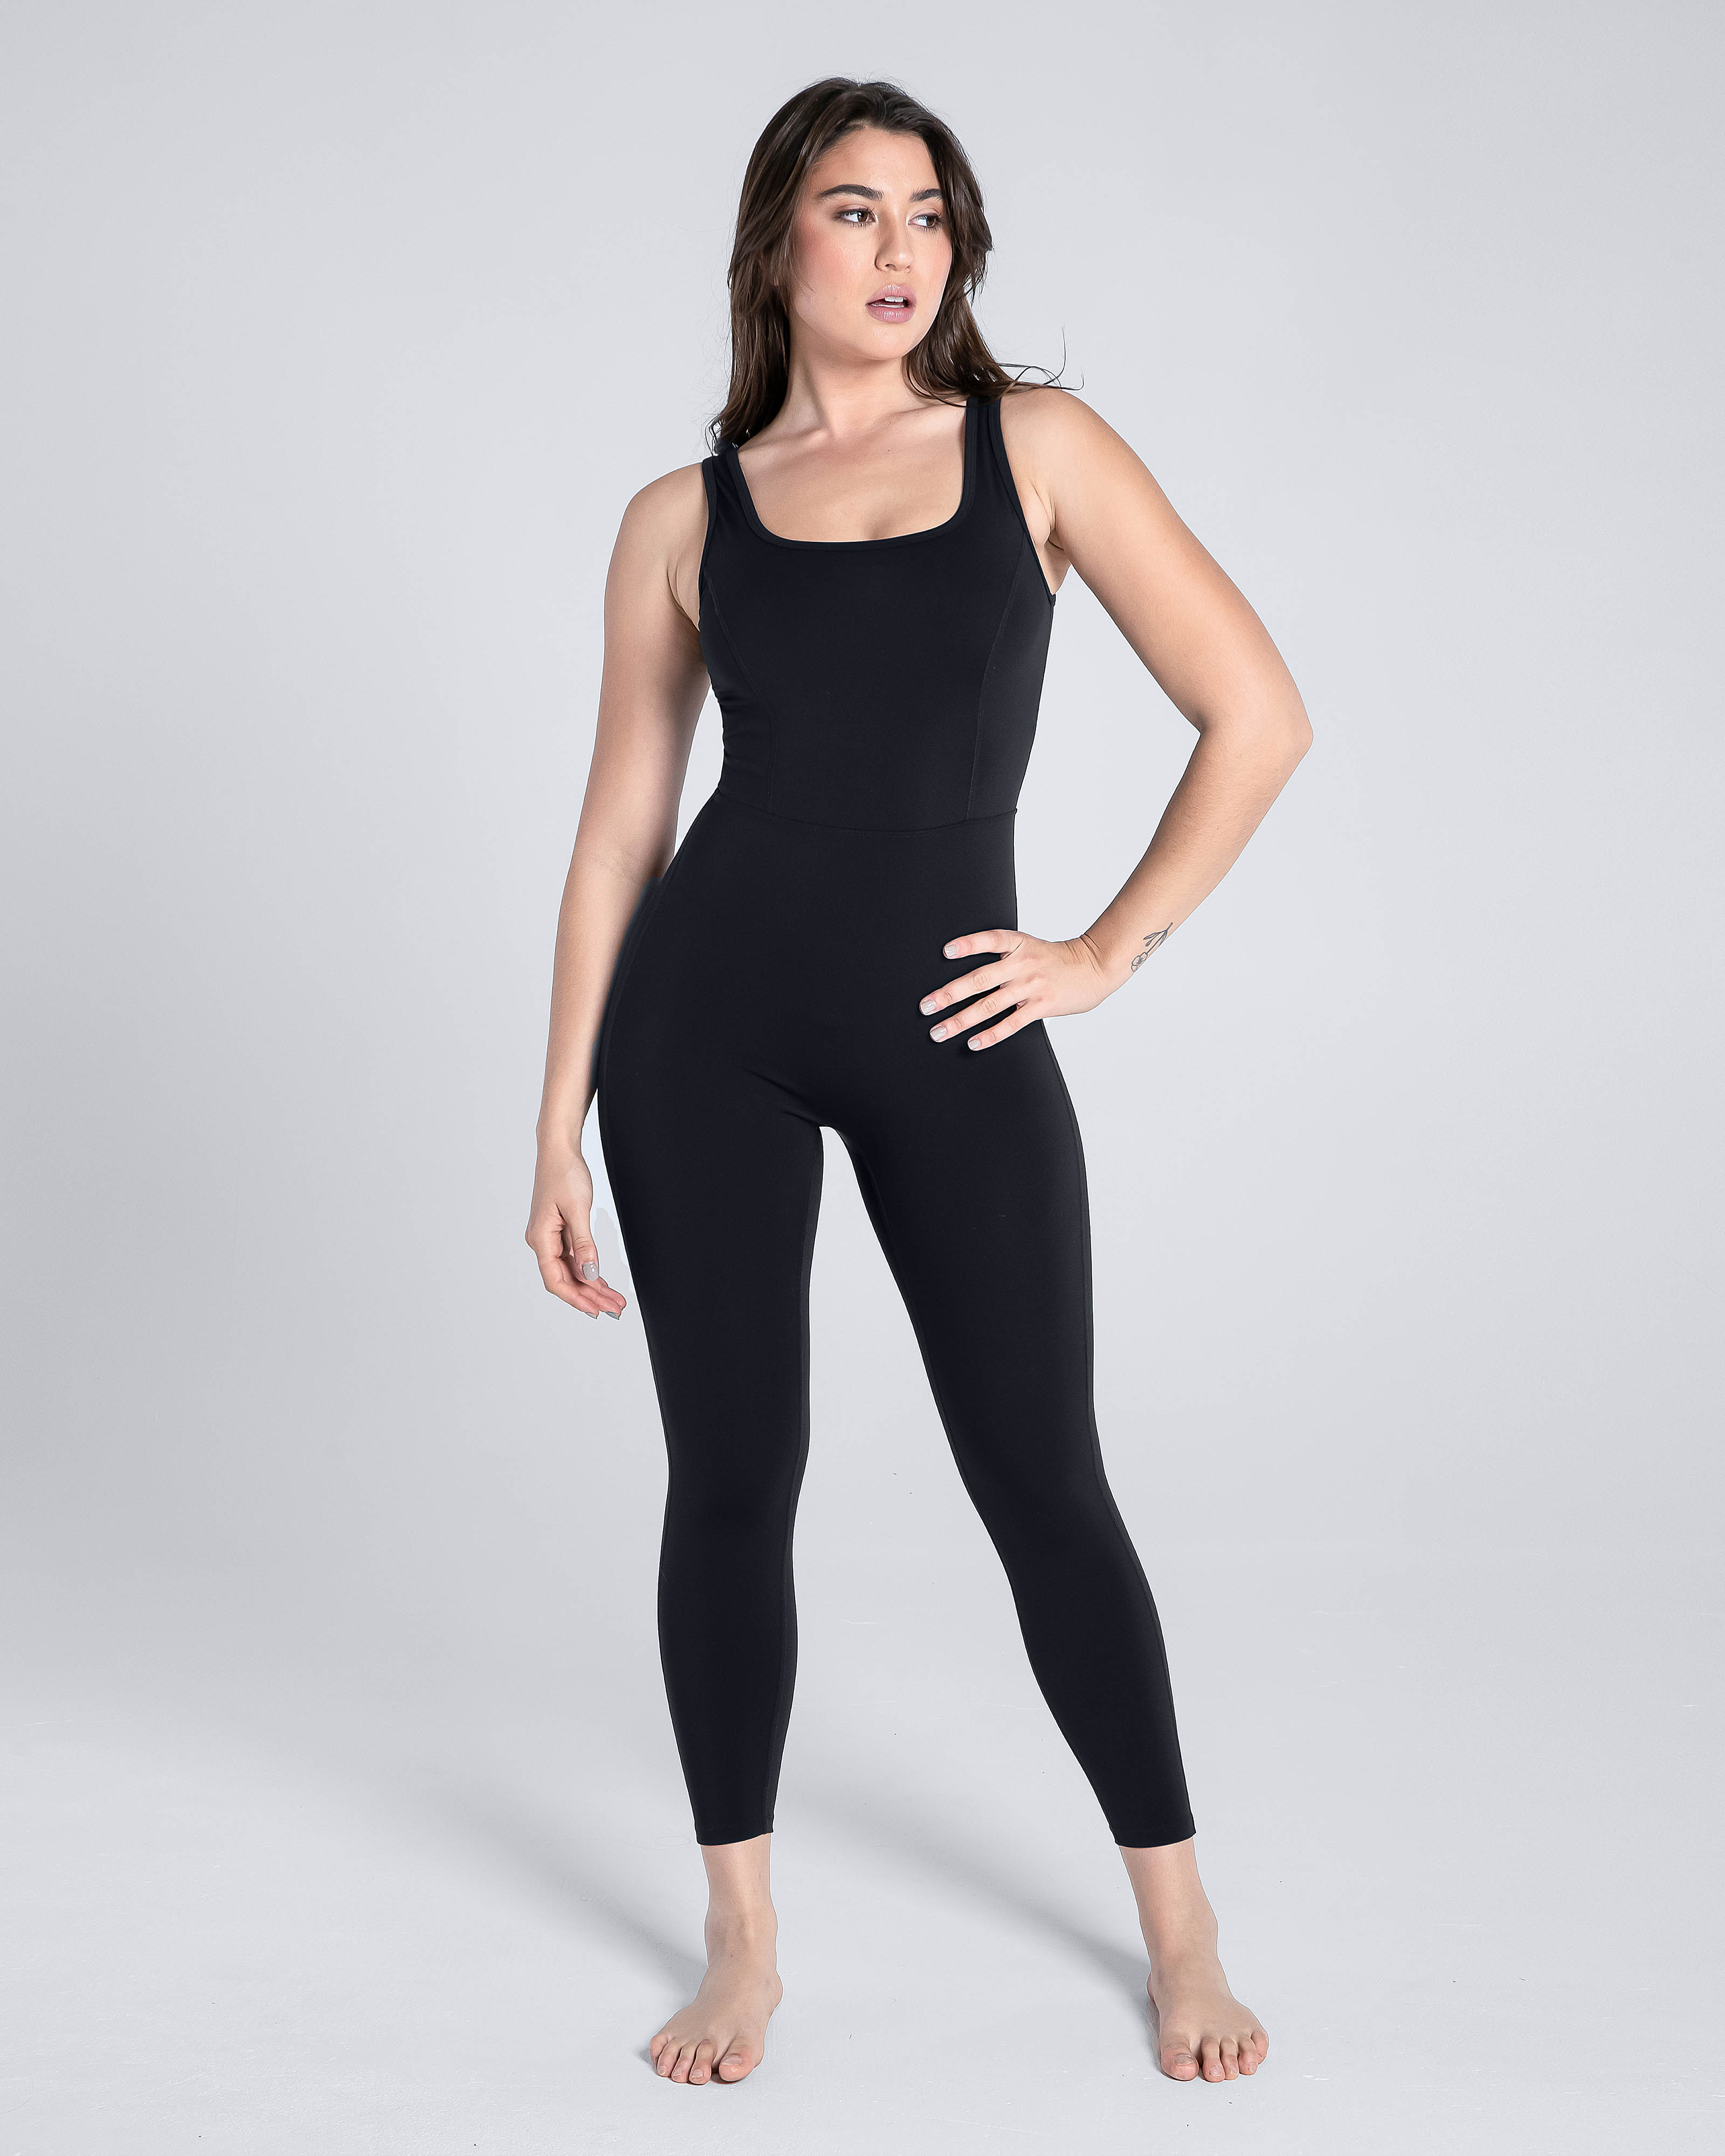 Cosmolle Activewear Fashion That Is Anything But Boring